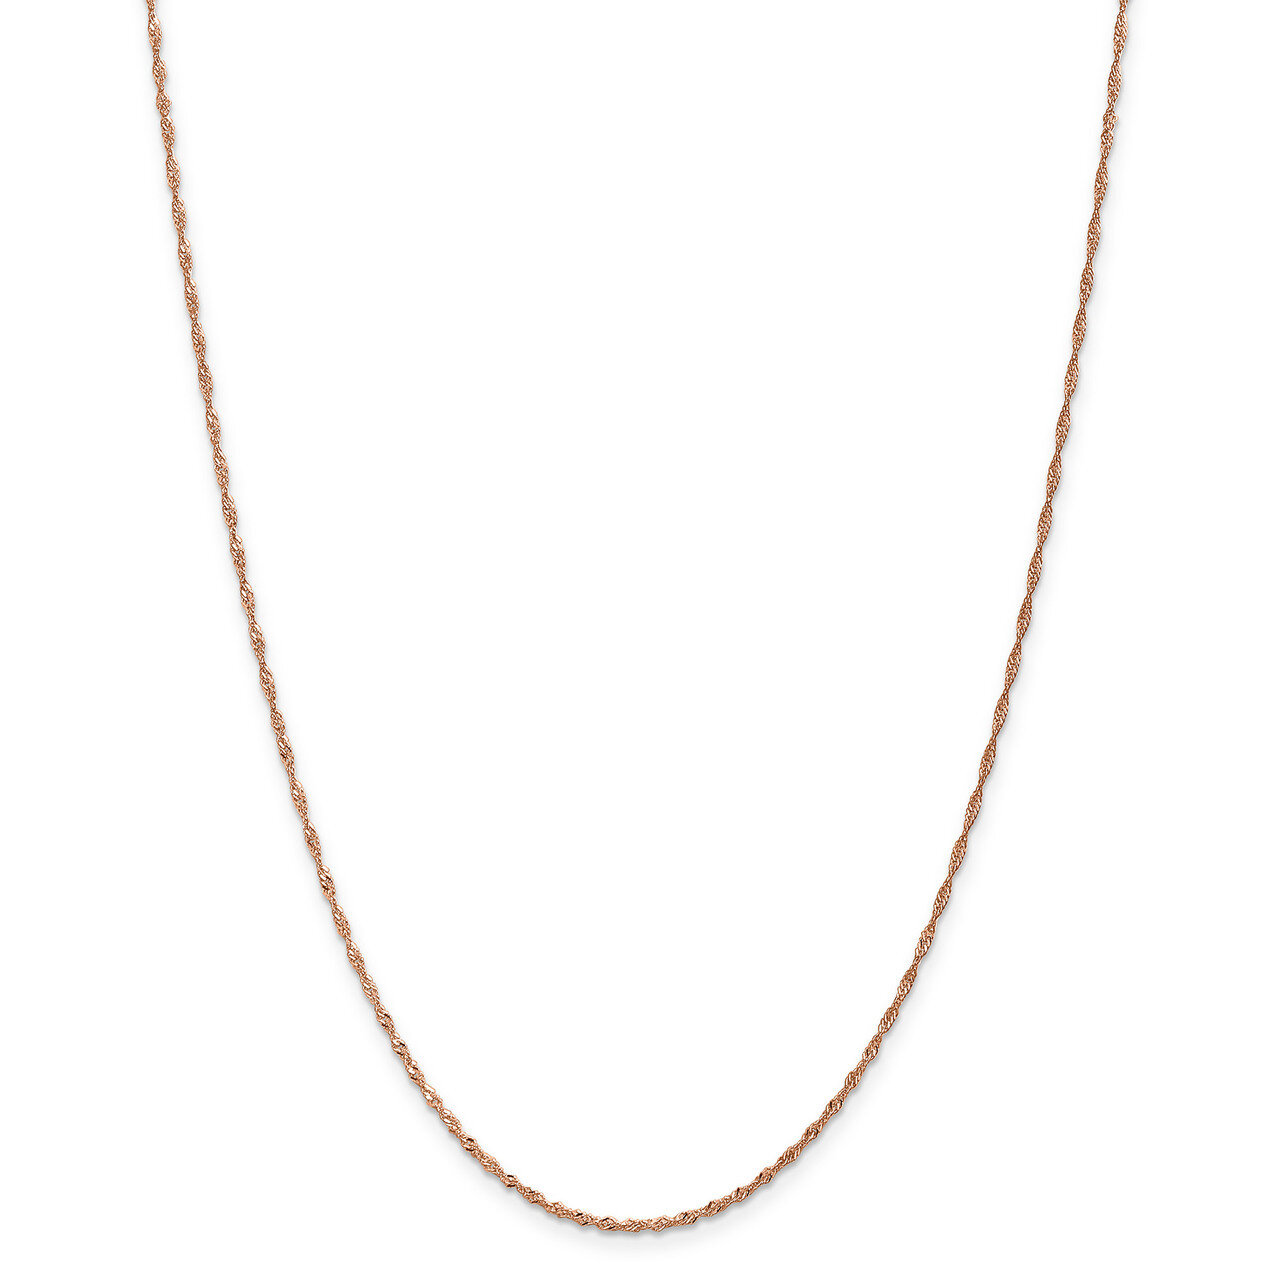 1 mm Singapore Chain 24 Inch 14k Rose Gold HB-7164-24